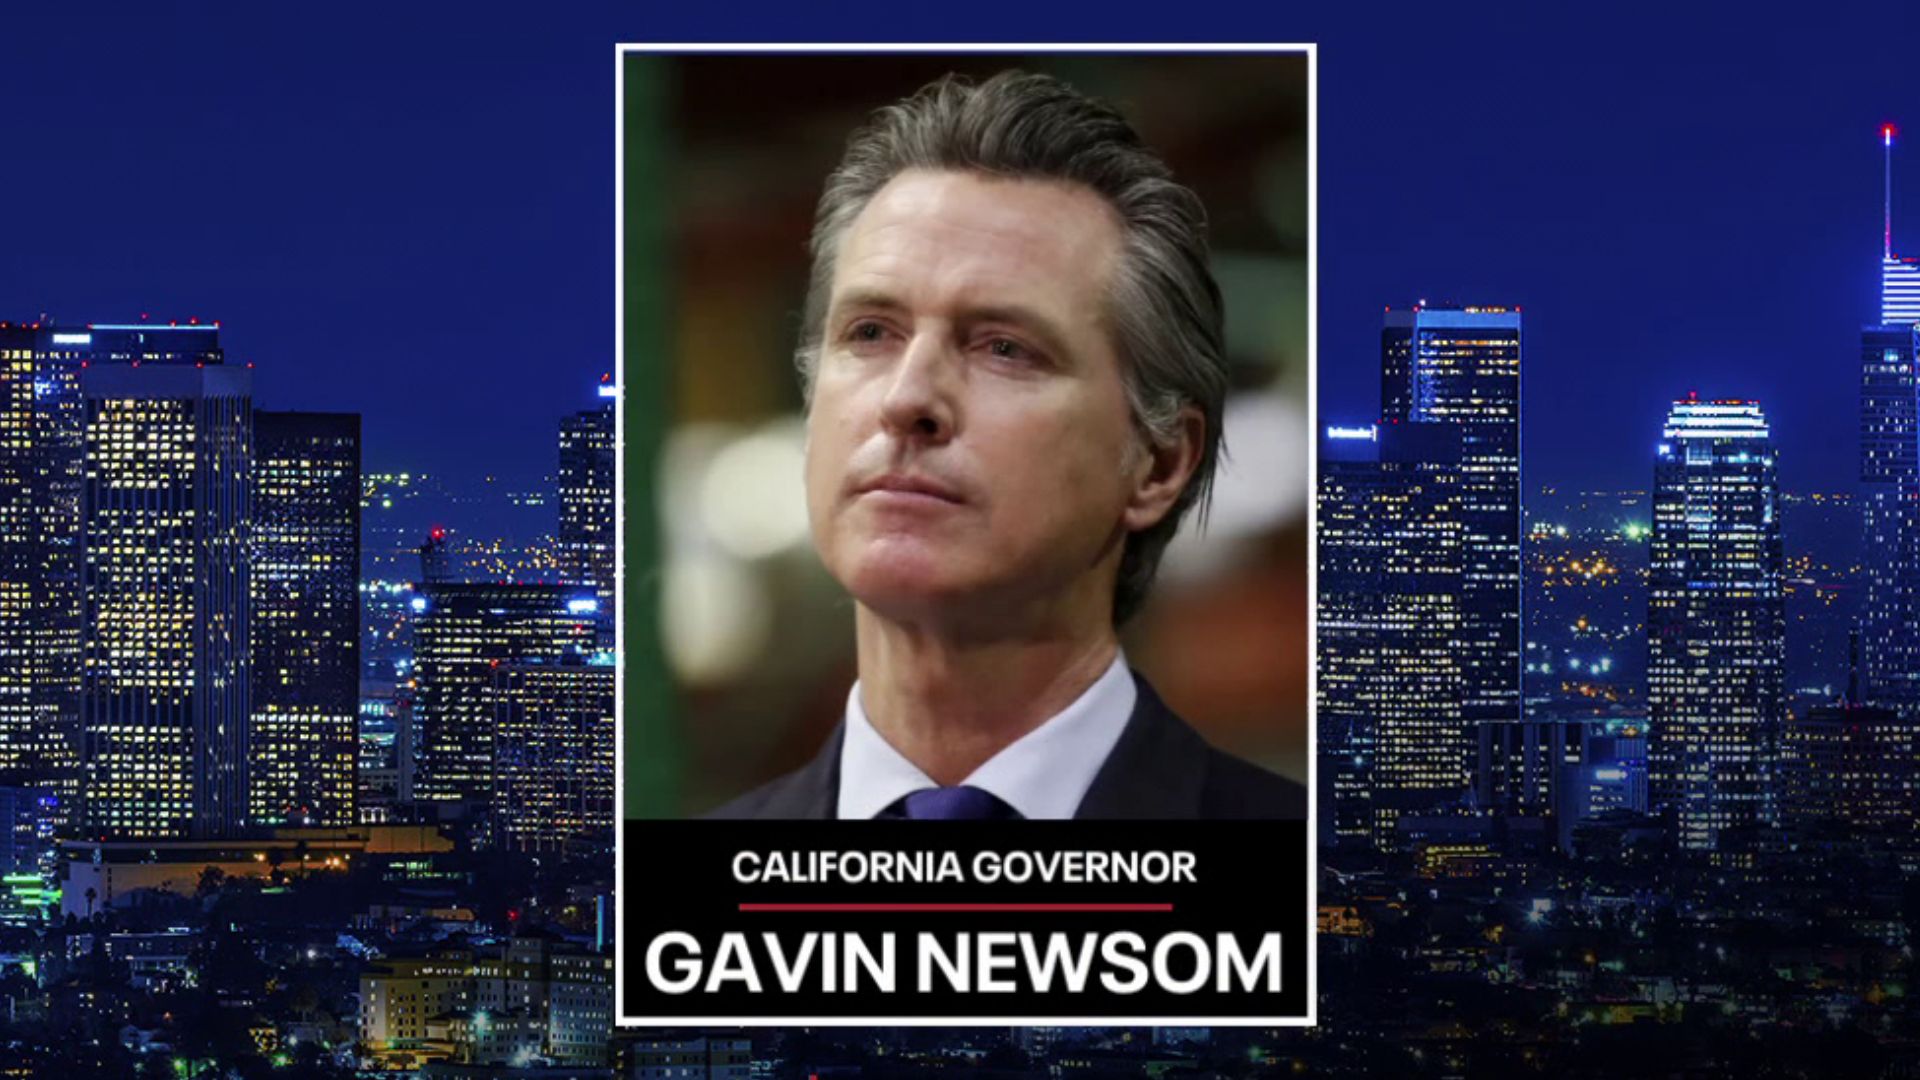 The Issue Is: Newsom on LGBTQ rights, Hannity interview, DeSantis